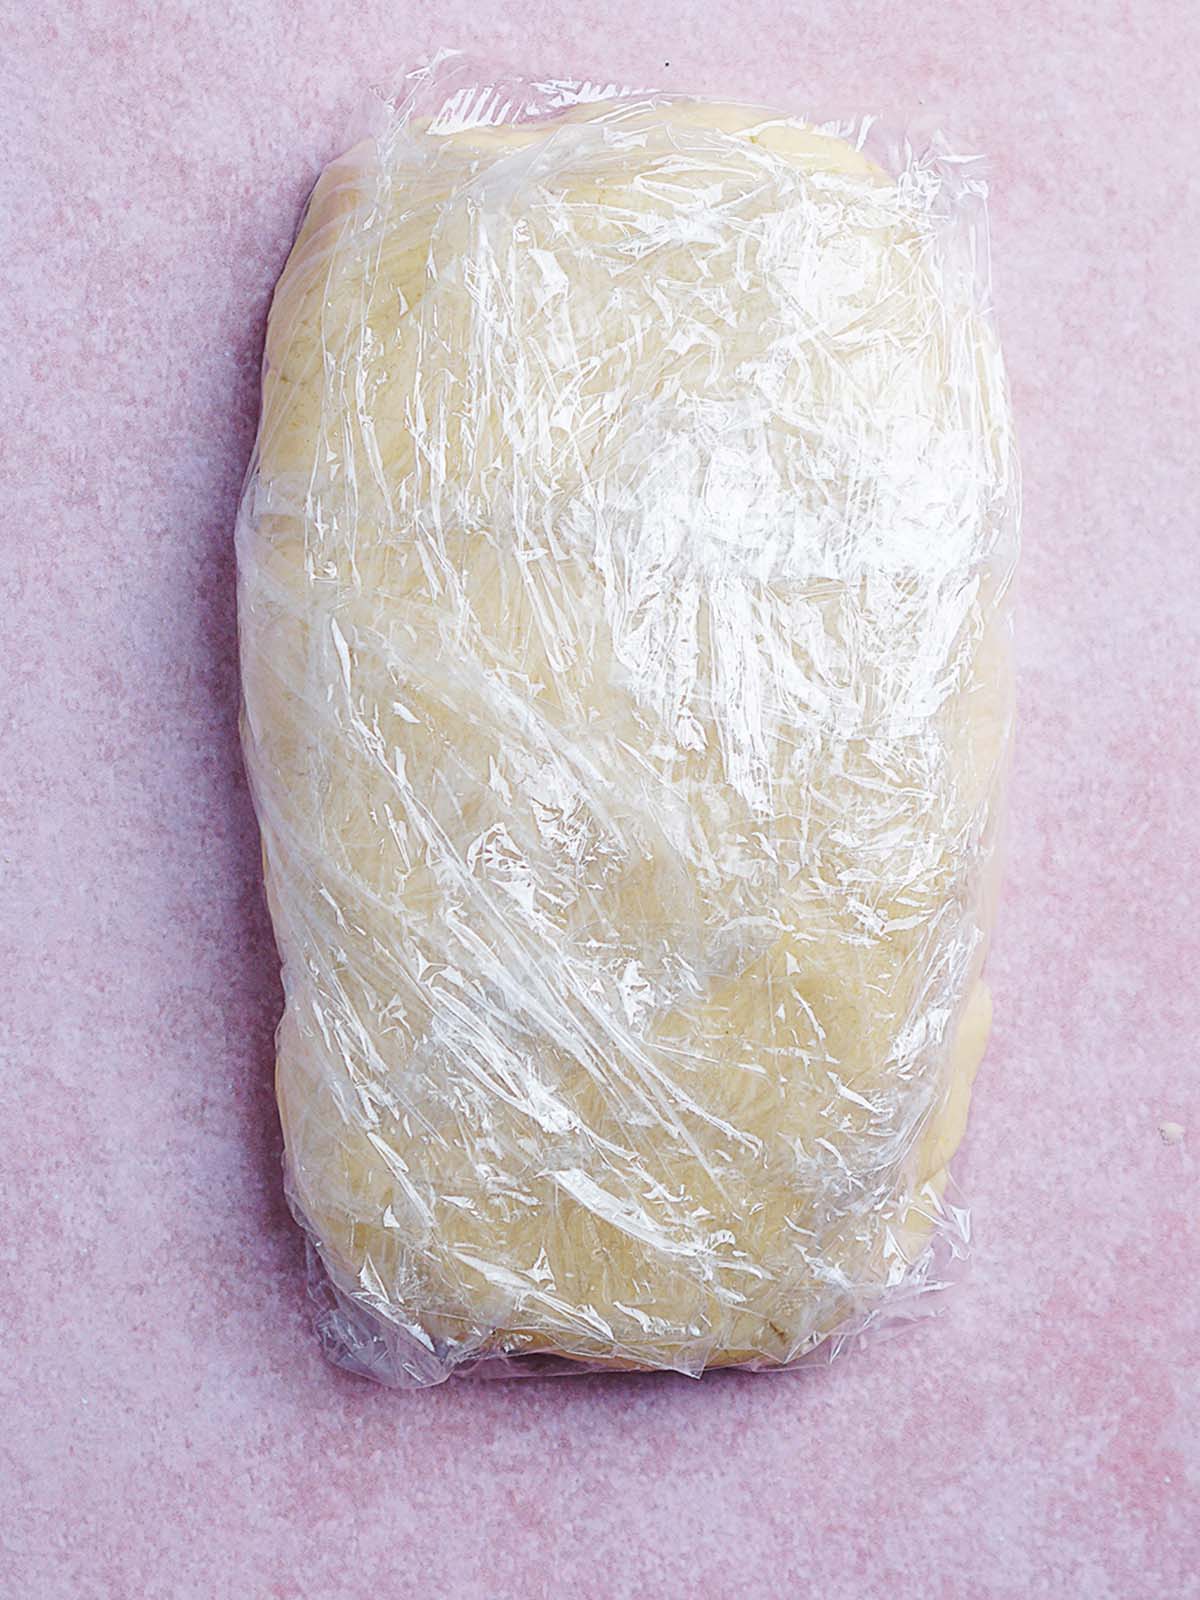 Cookie dough wrapped in plastic wrap.